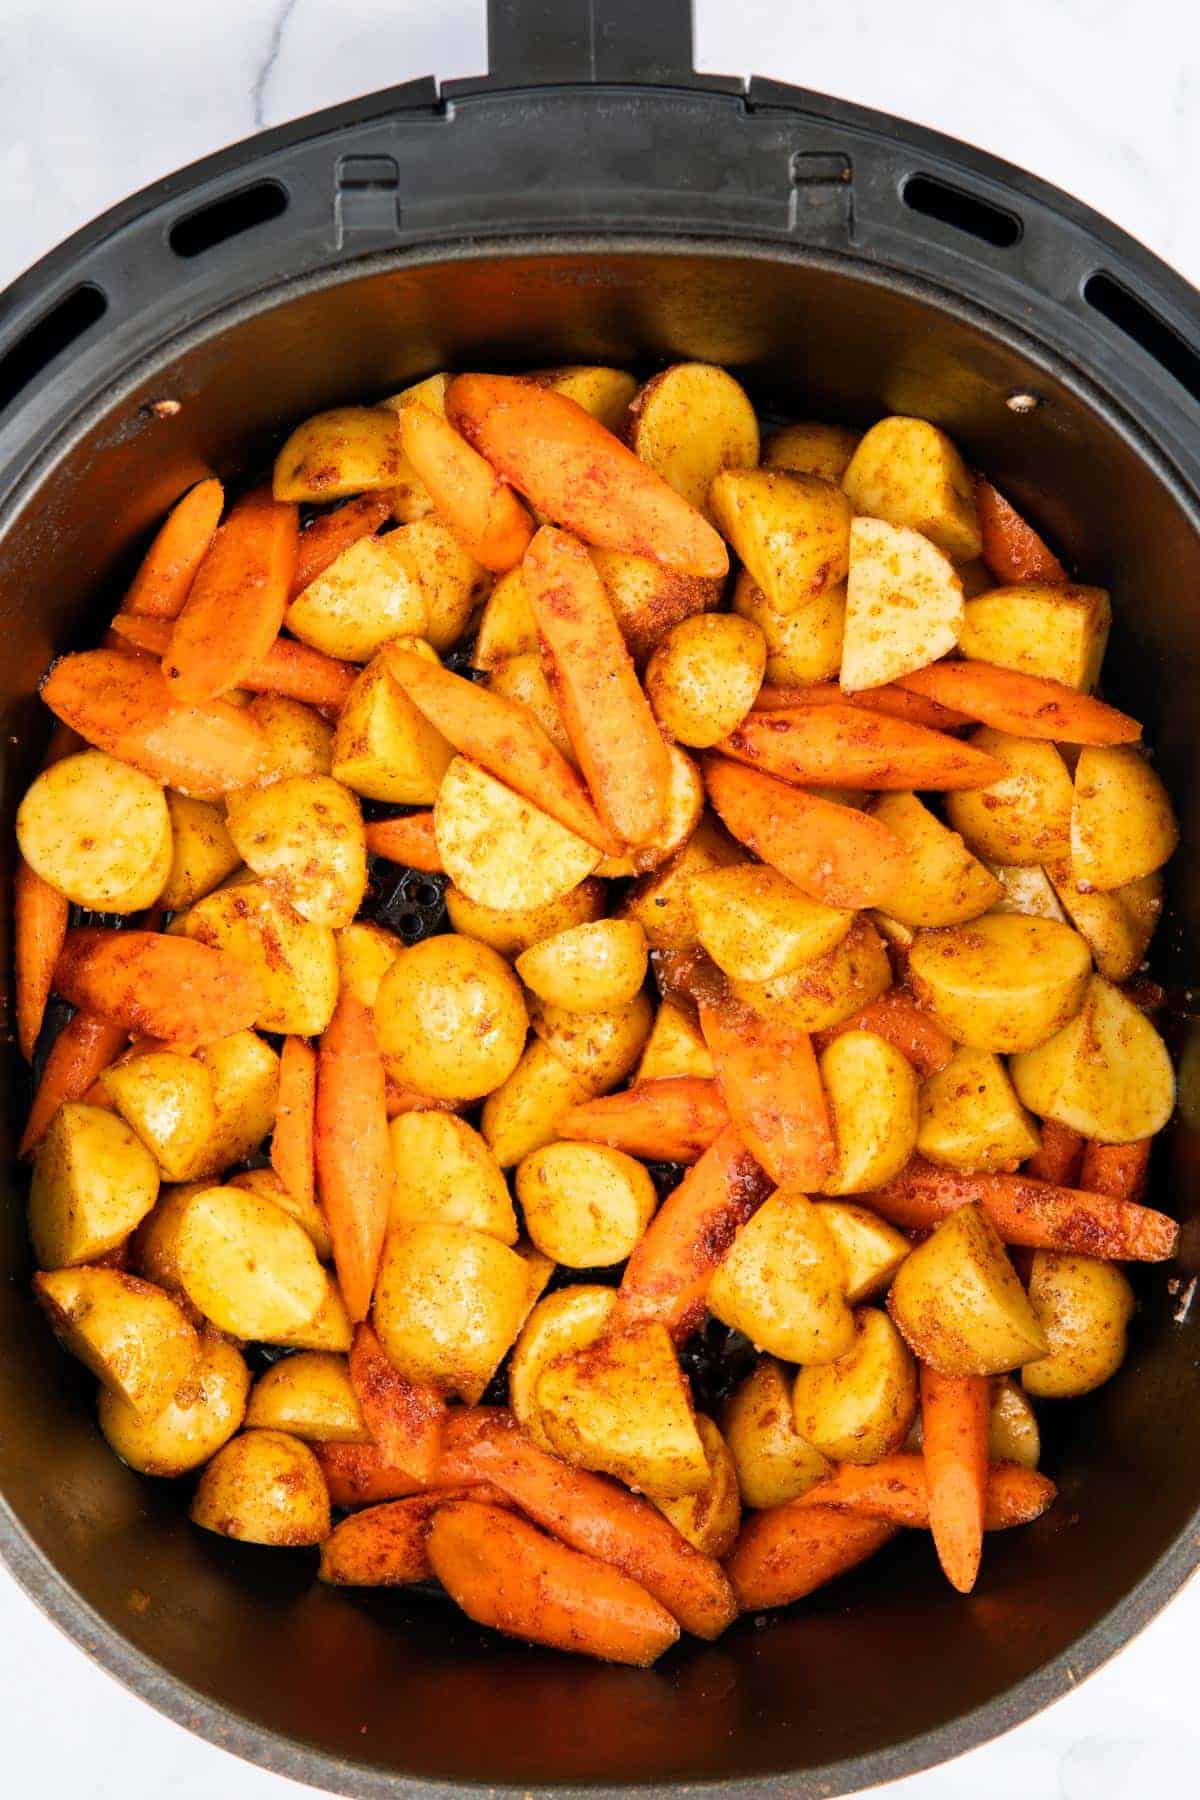 Potatoes and carrots in an air fryer basket.